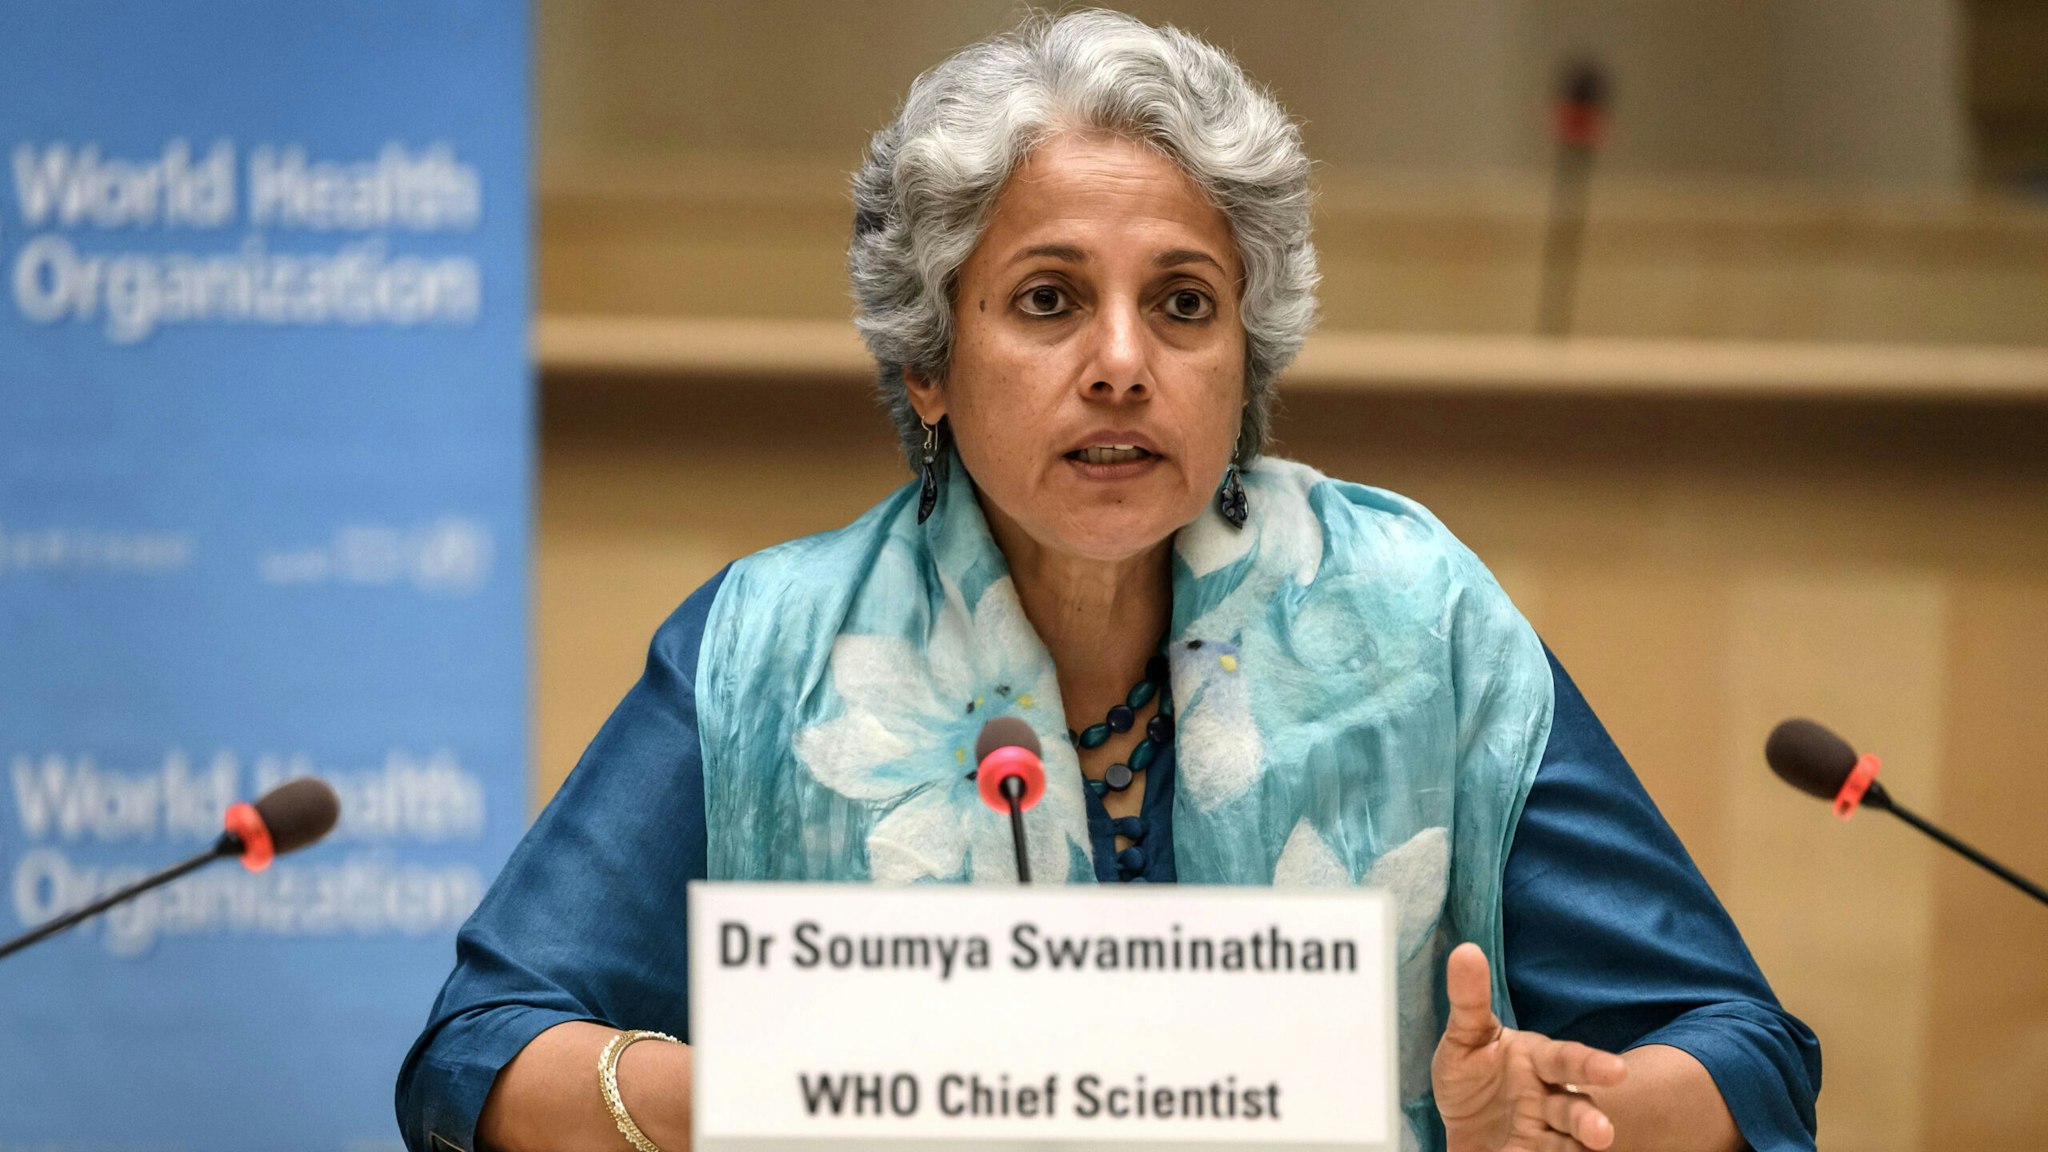 World Health Organization (WHO) Chief Scientist Soumya Swaminathan attends a press conference organised by the Geneva Association of United Nations Correspondents (ACANU) amid the COVID-19 outbreak, caused by the novel coronavirus, on July 3, 2020 at the WHO headquarters in Geneva.